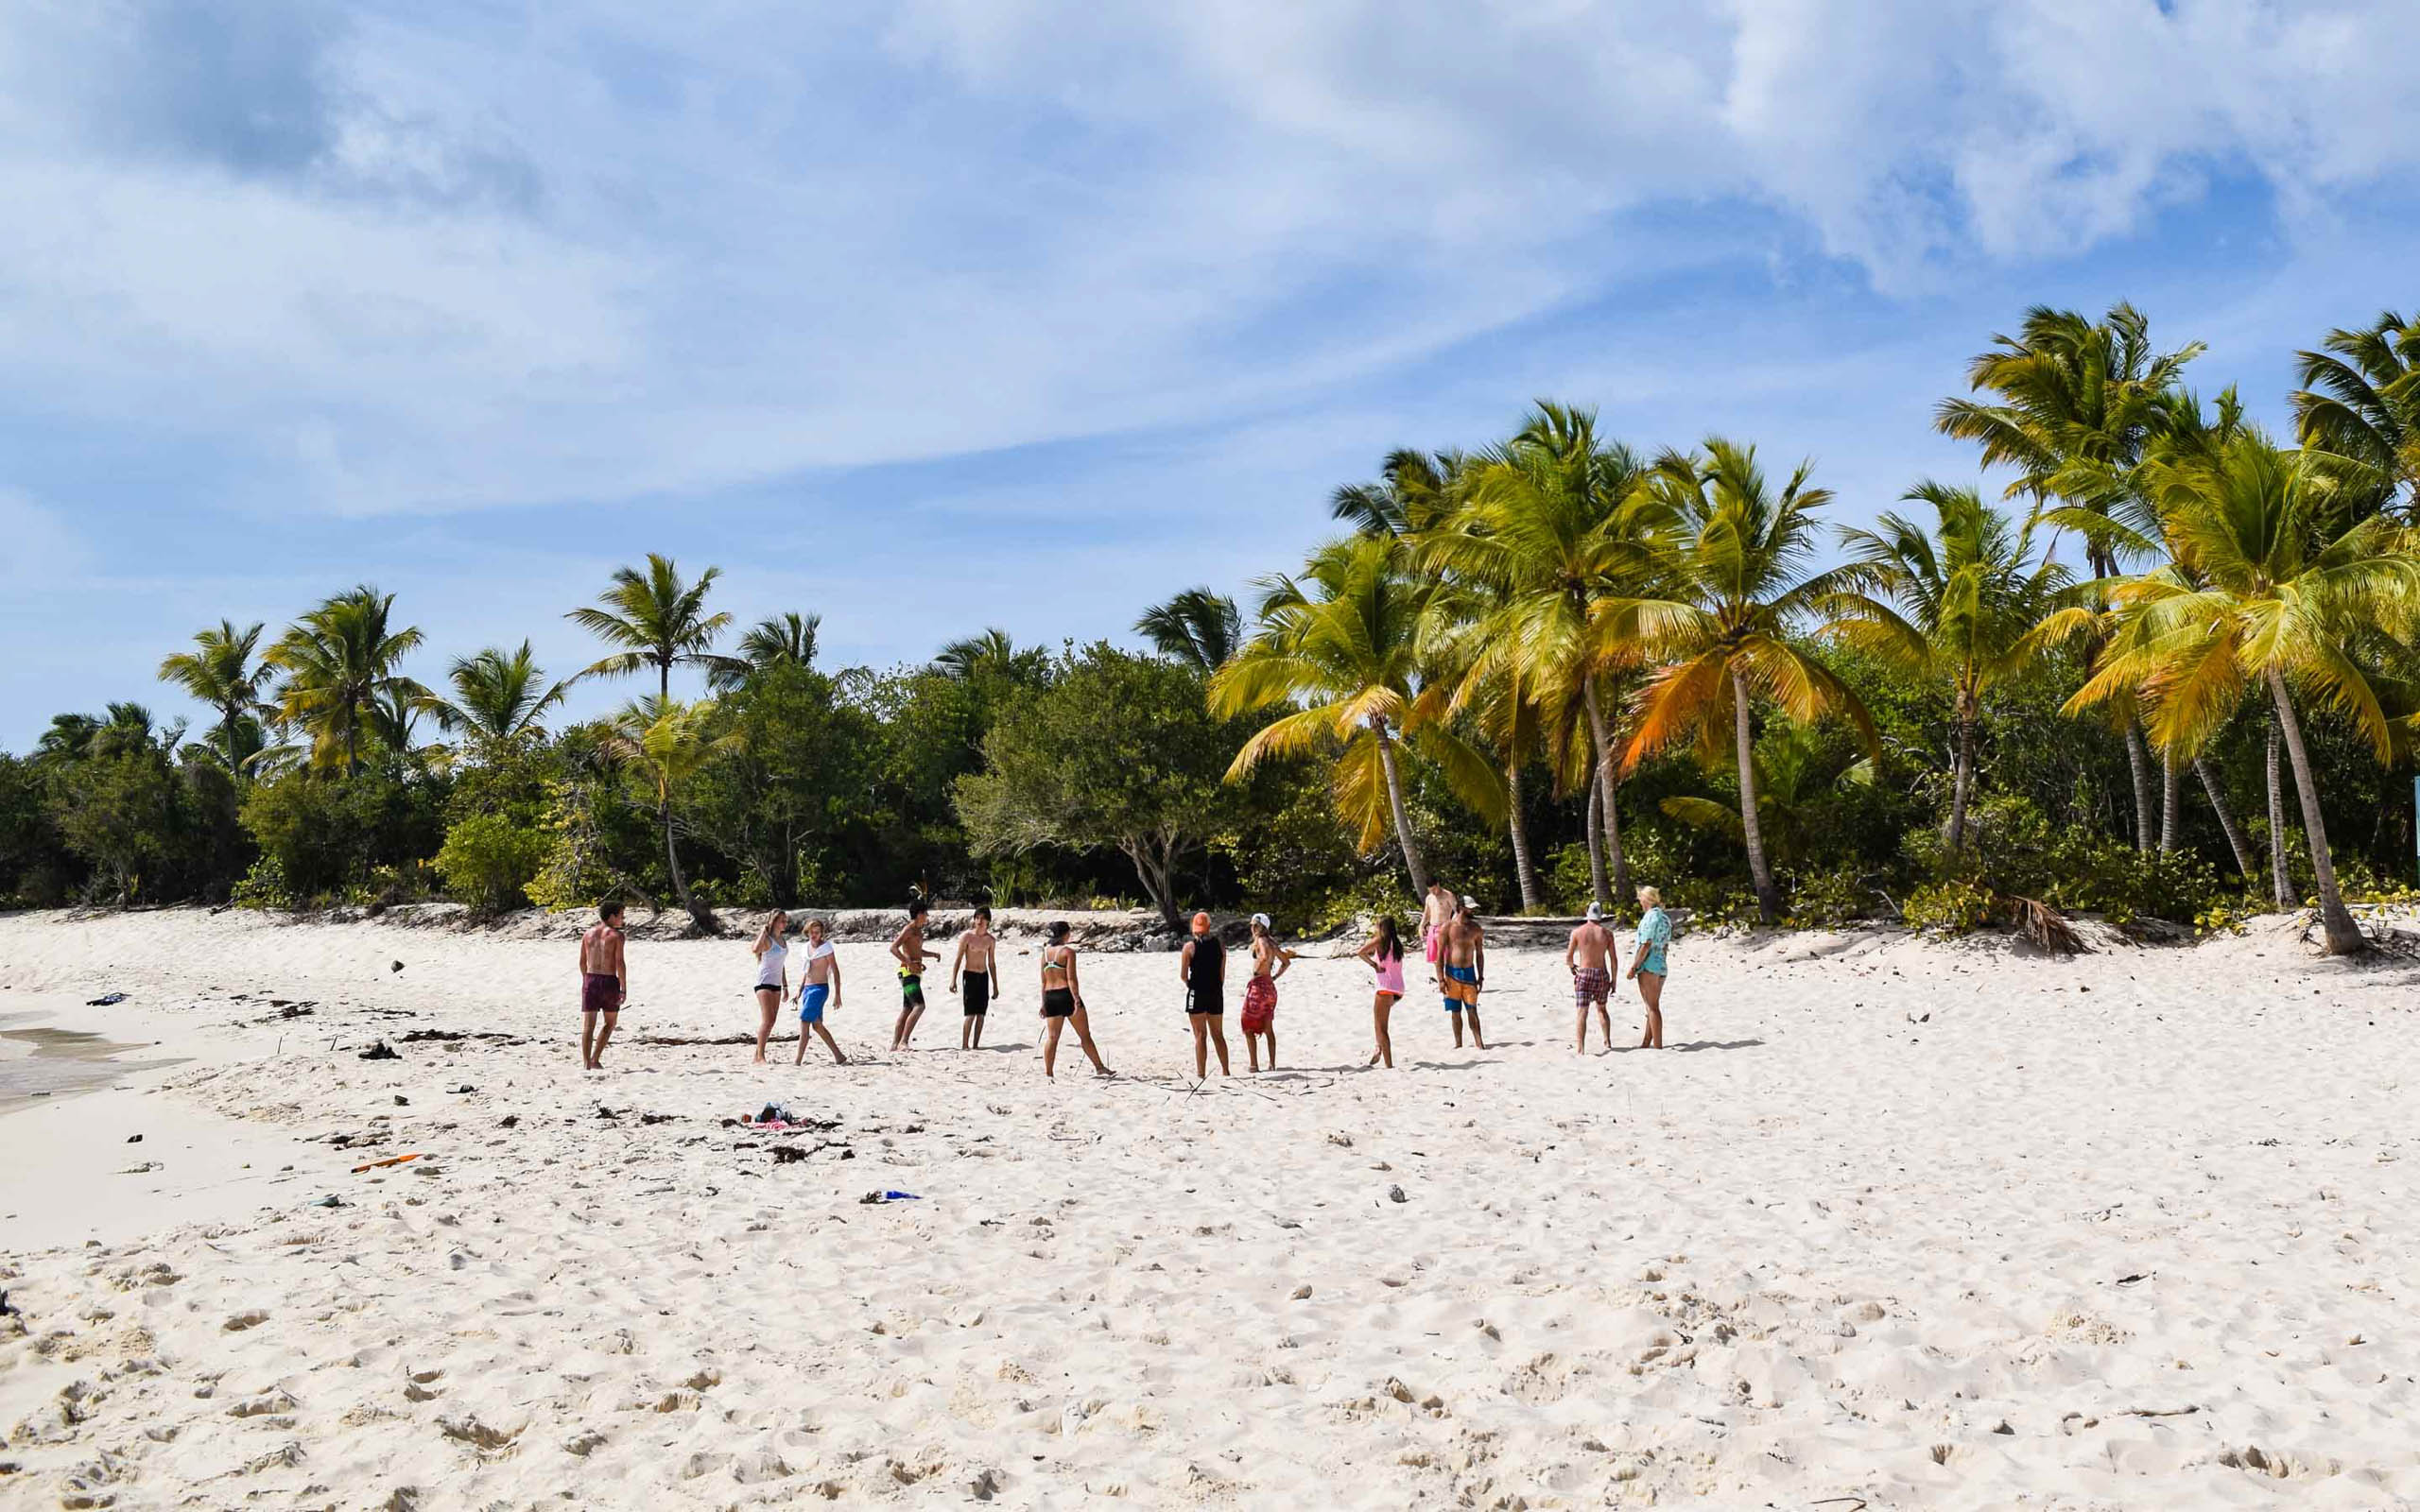 A group of people standing on a sandy beach.